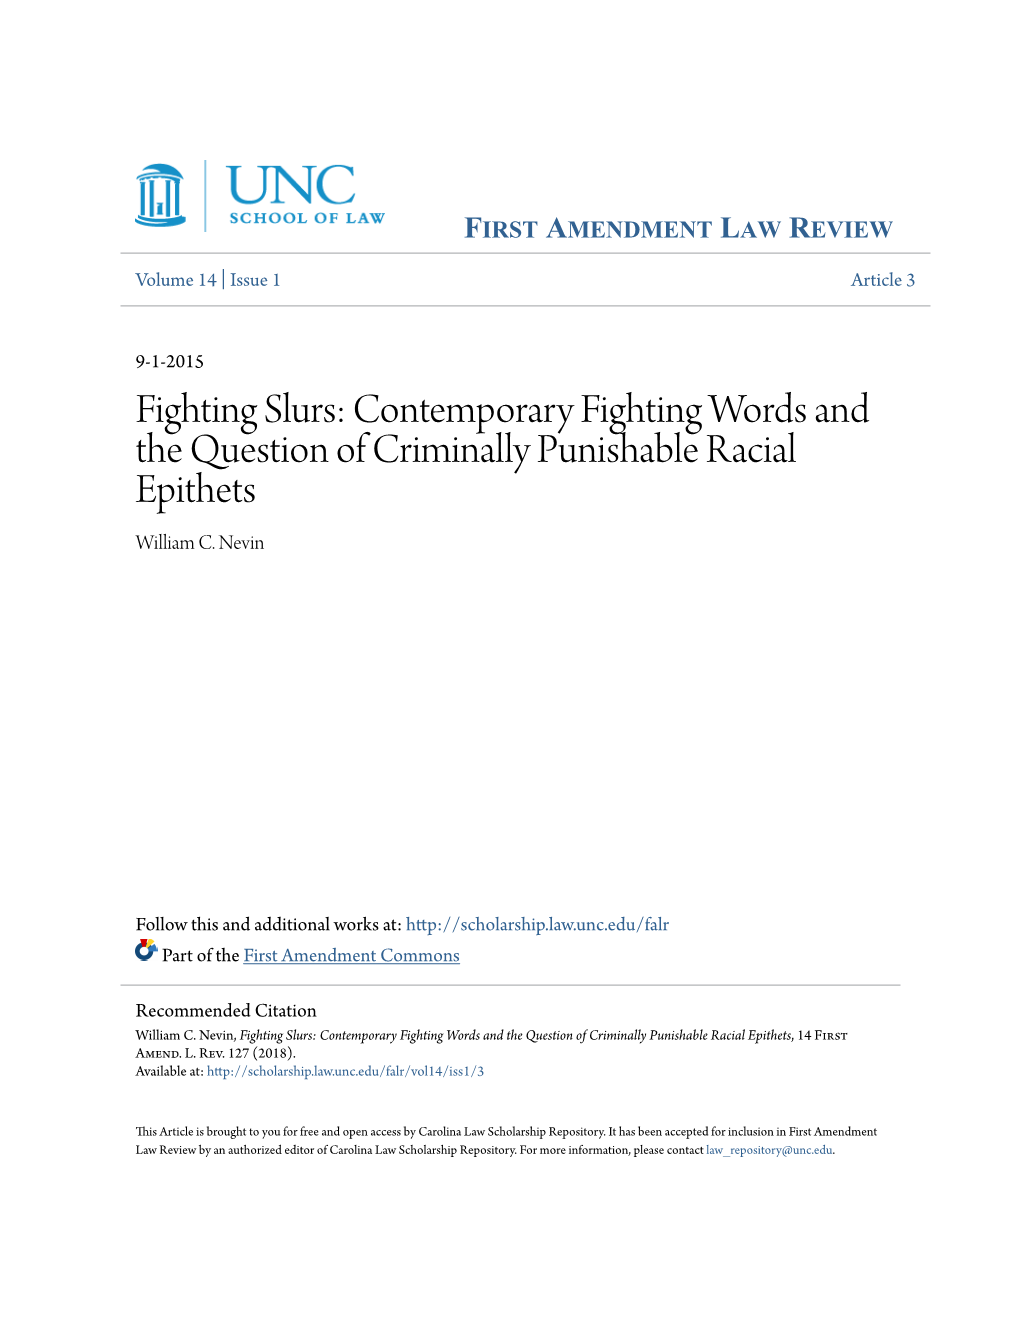 Fighting Slurs: Contemporary Fighting Words and the Question of Criminally Punishable Racial Epithets William C